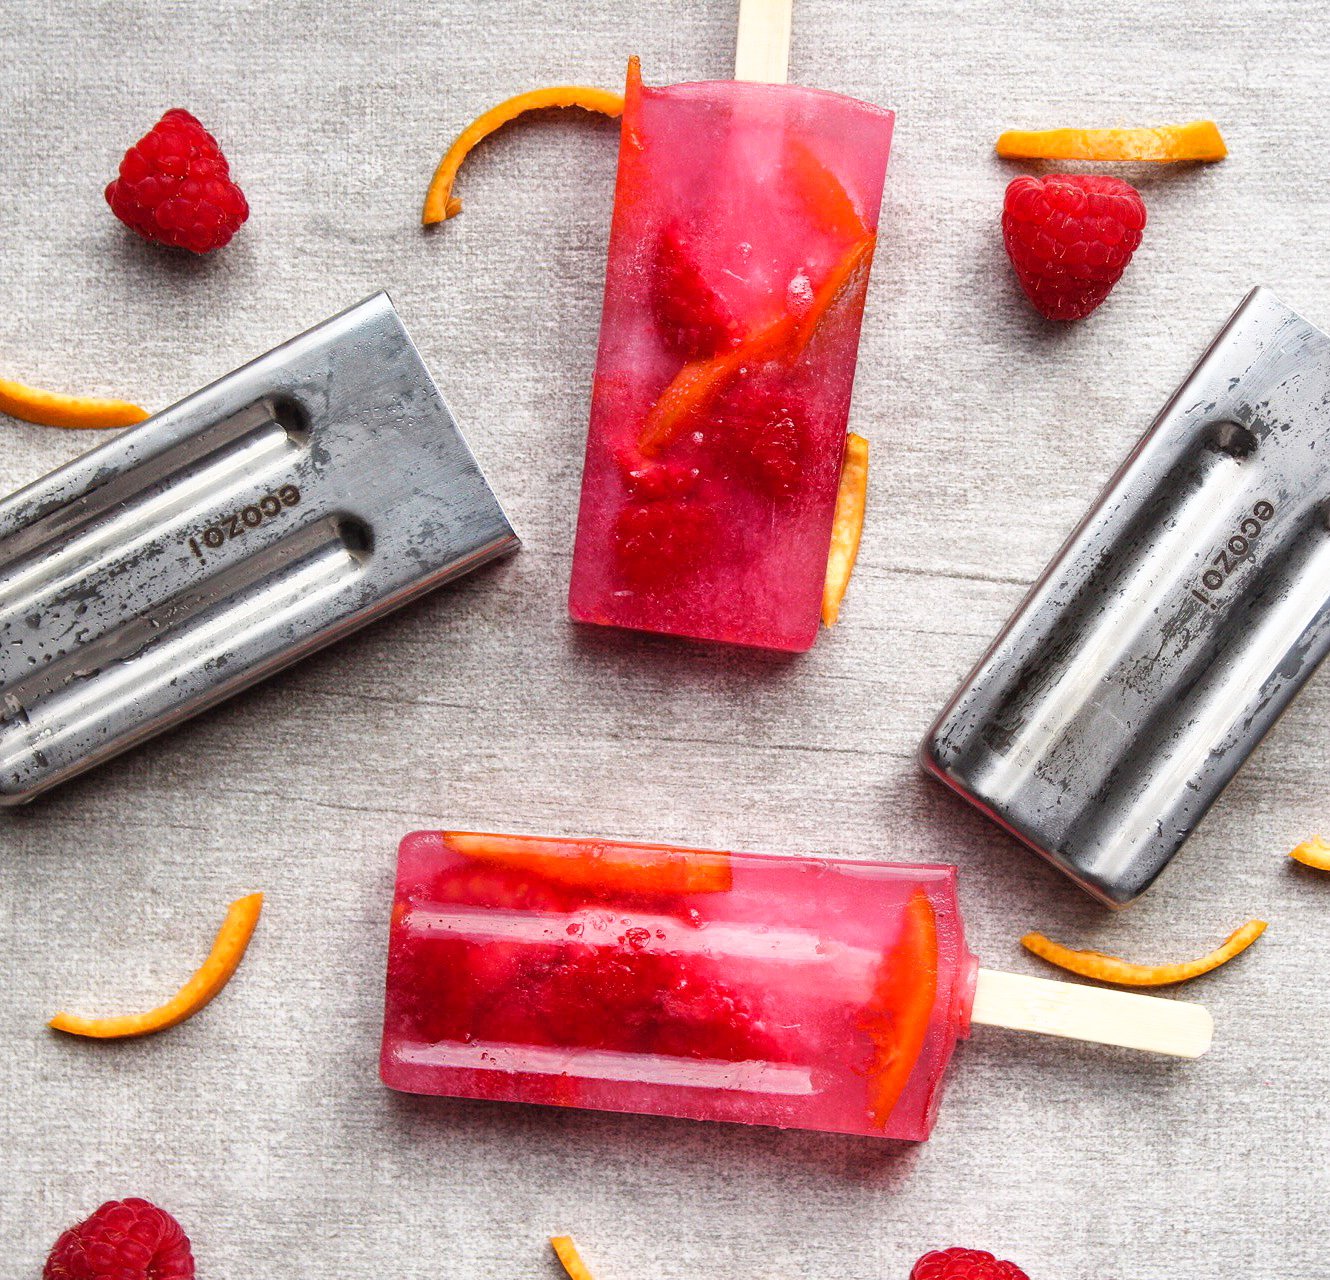 New Freezycup Stainless Steel Popsicle Molds Use Less Space in the Freezer  » My Plastic-free Life